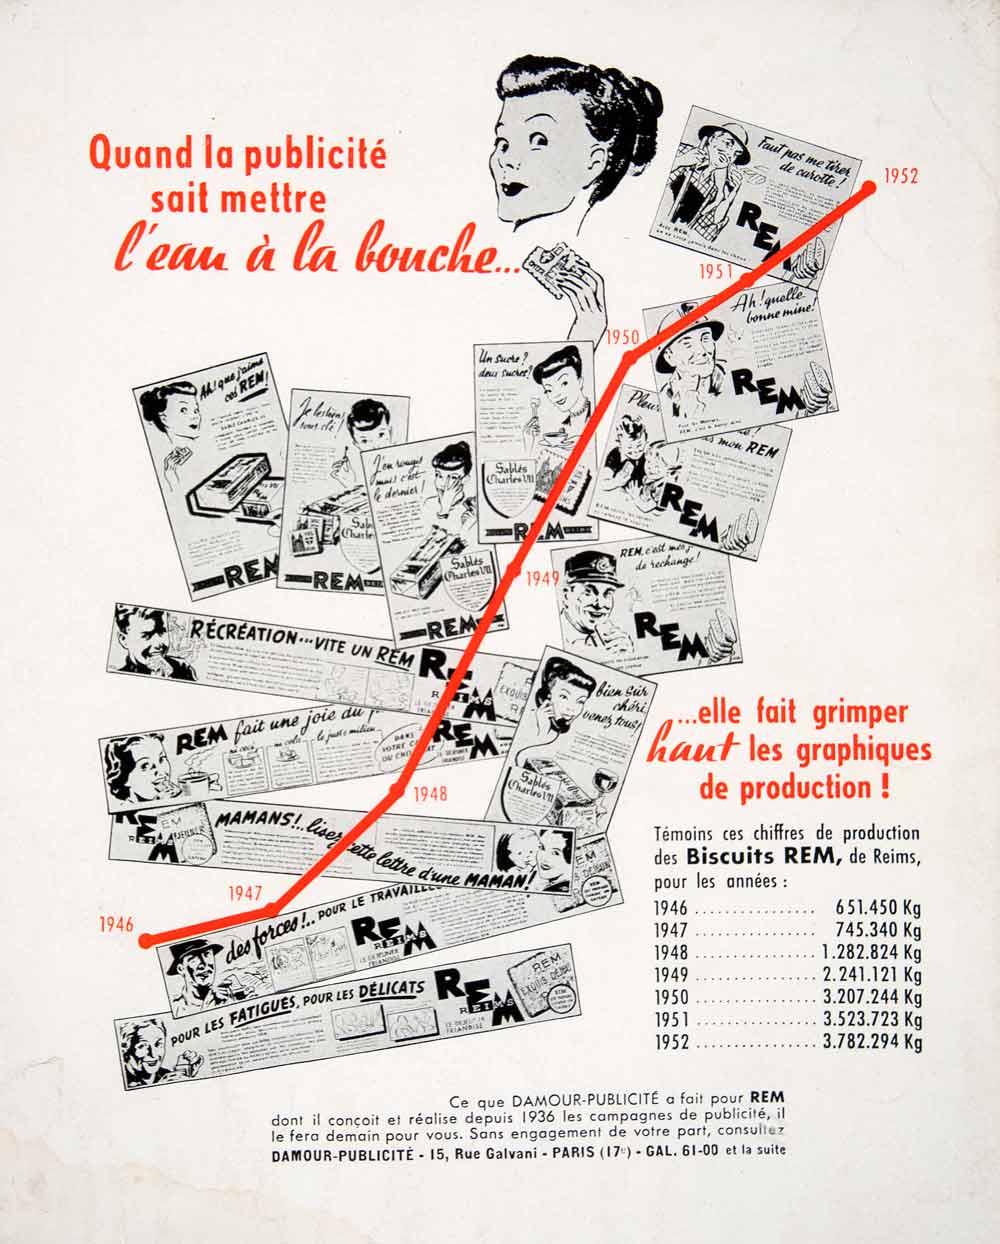 1953 Ad Damour Publicite Advertising Agency Biscuits REM French15 Rue VEN8